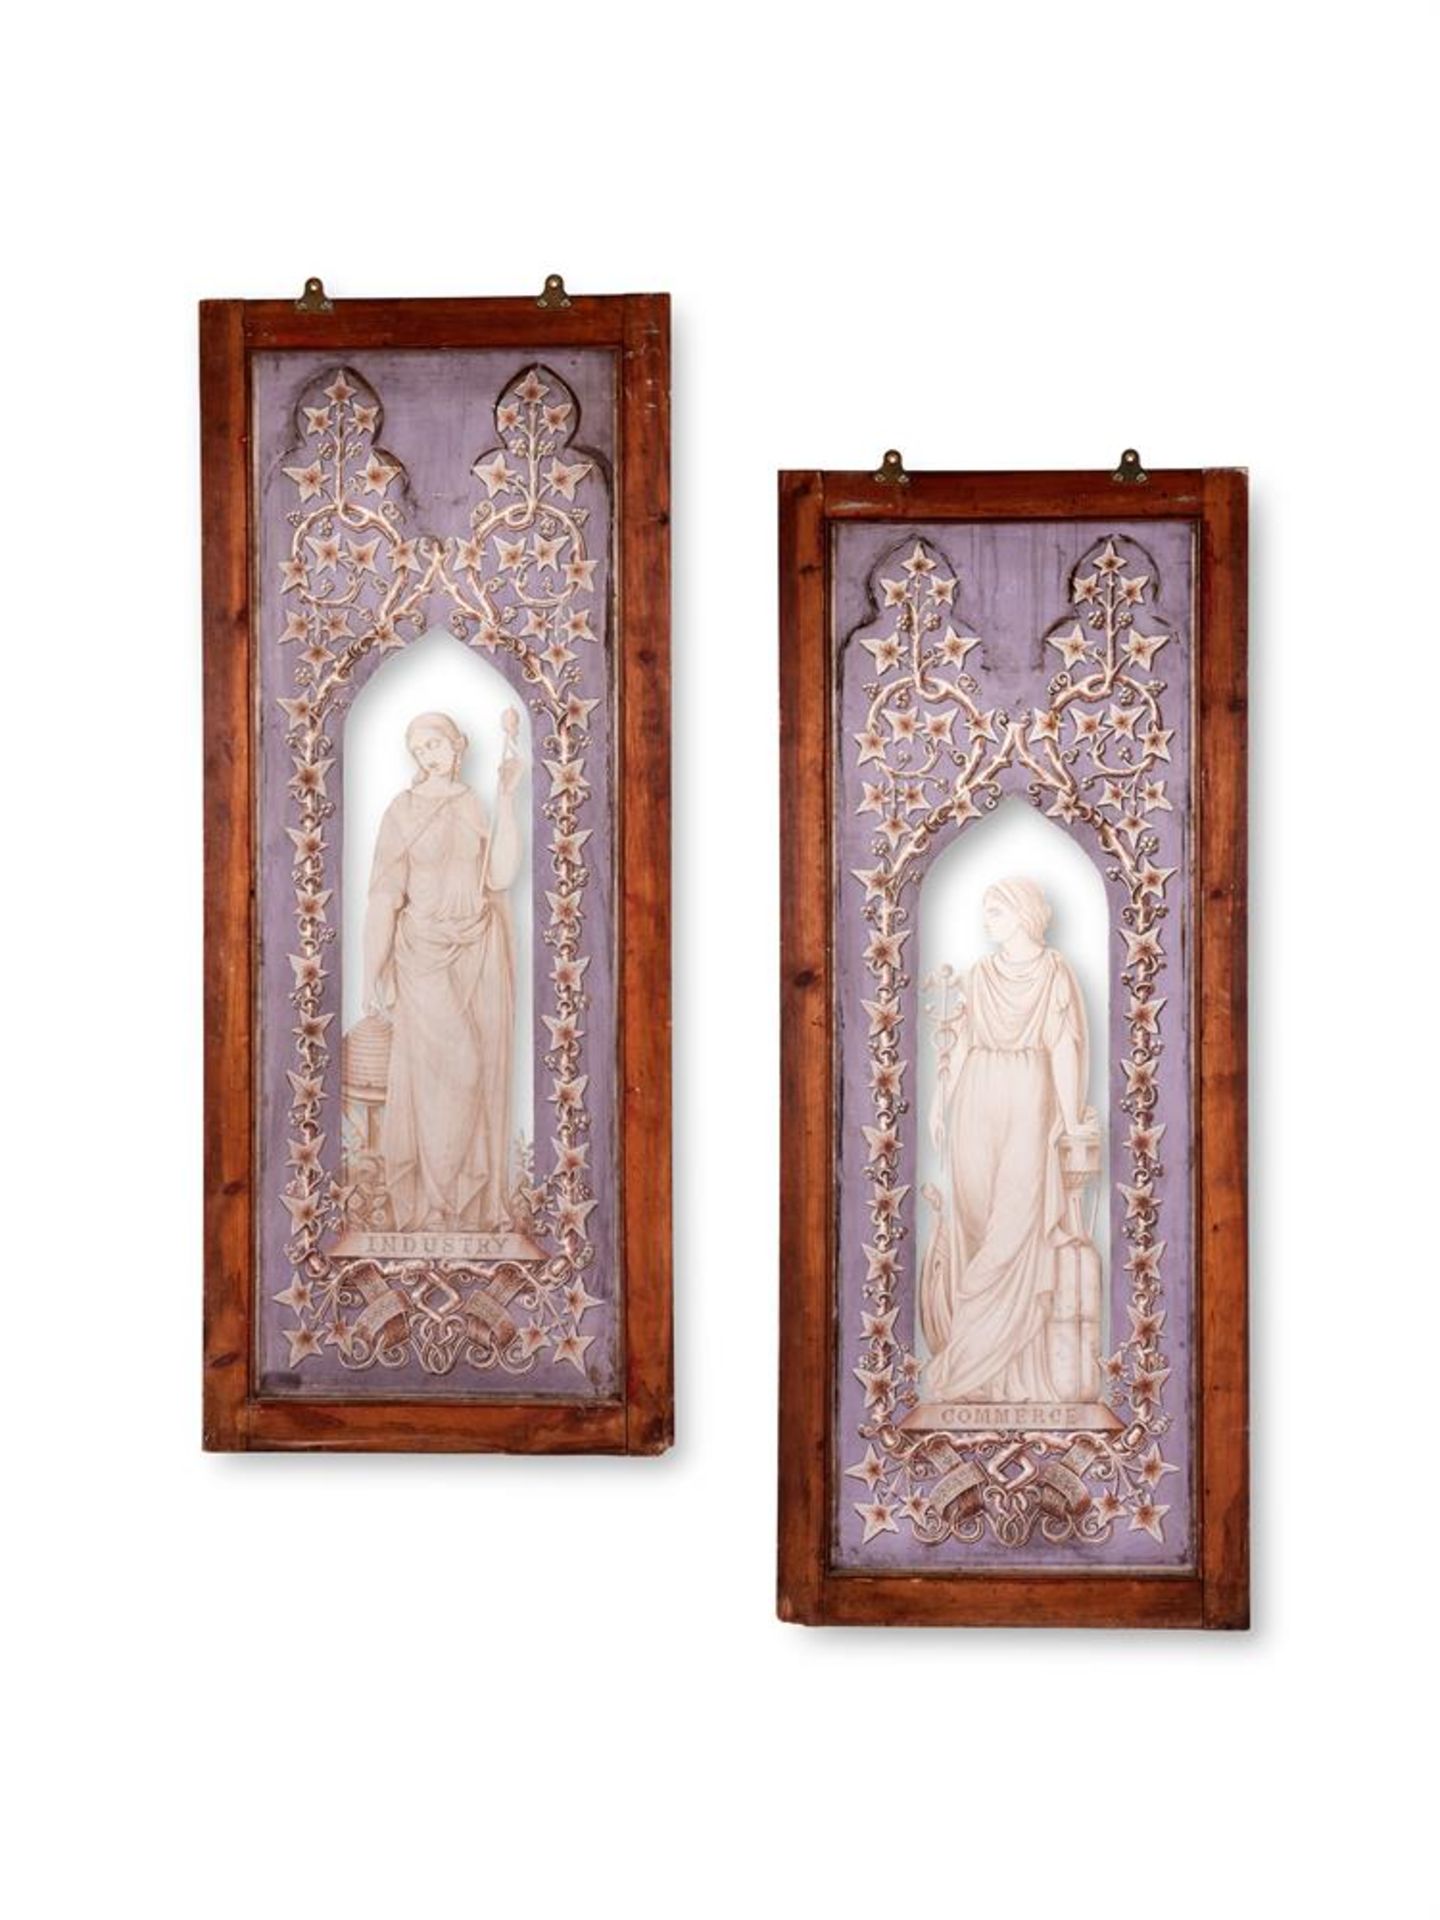 A PAIR OF VICTORIAN STAINED AND ETCHED GLASS WINDOWS, SECOND HALF 19TH CENTURY